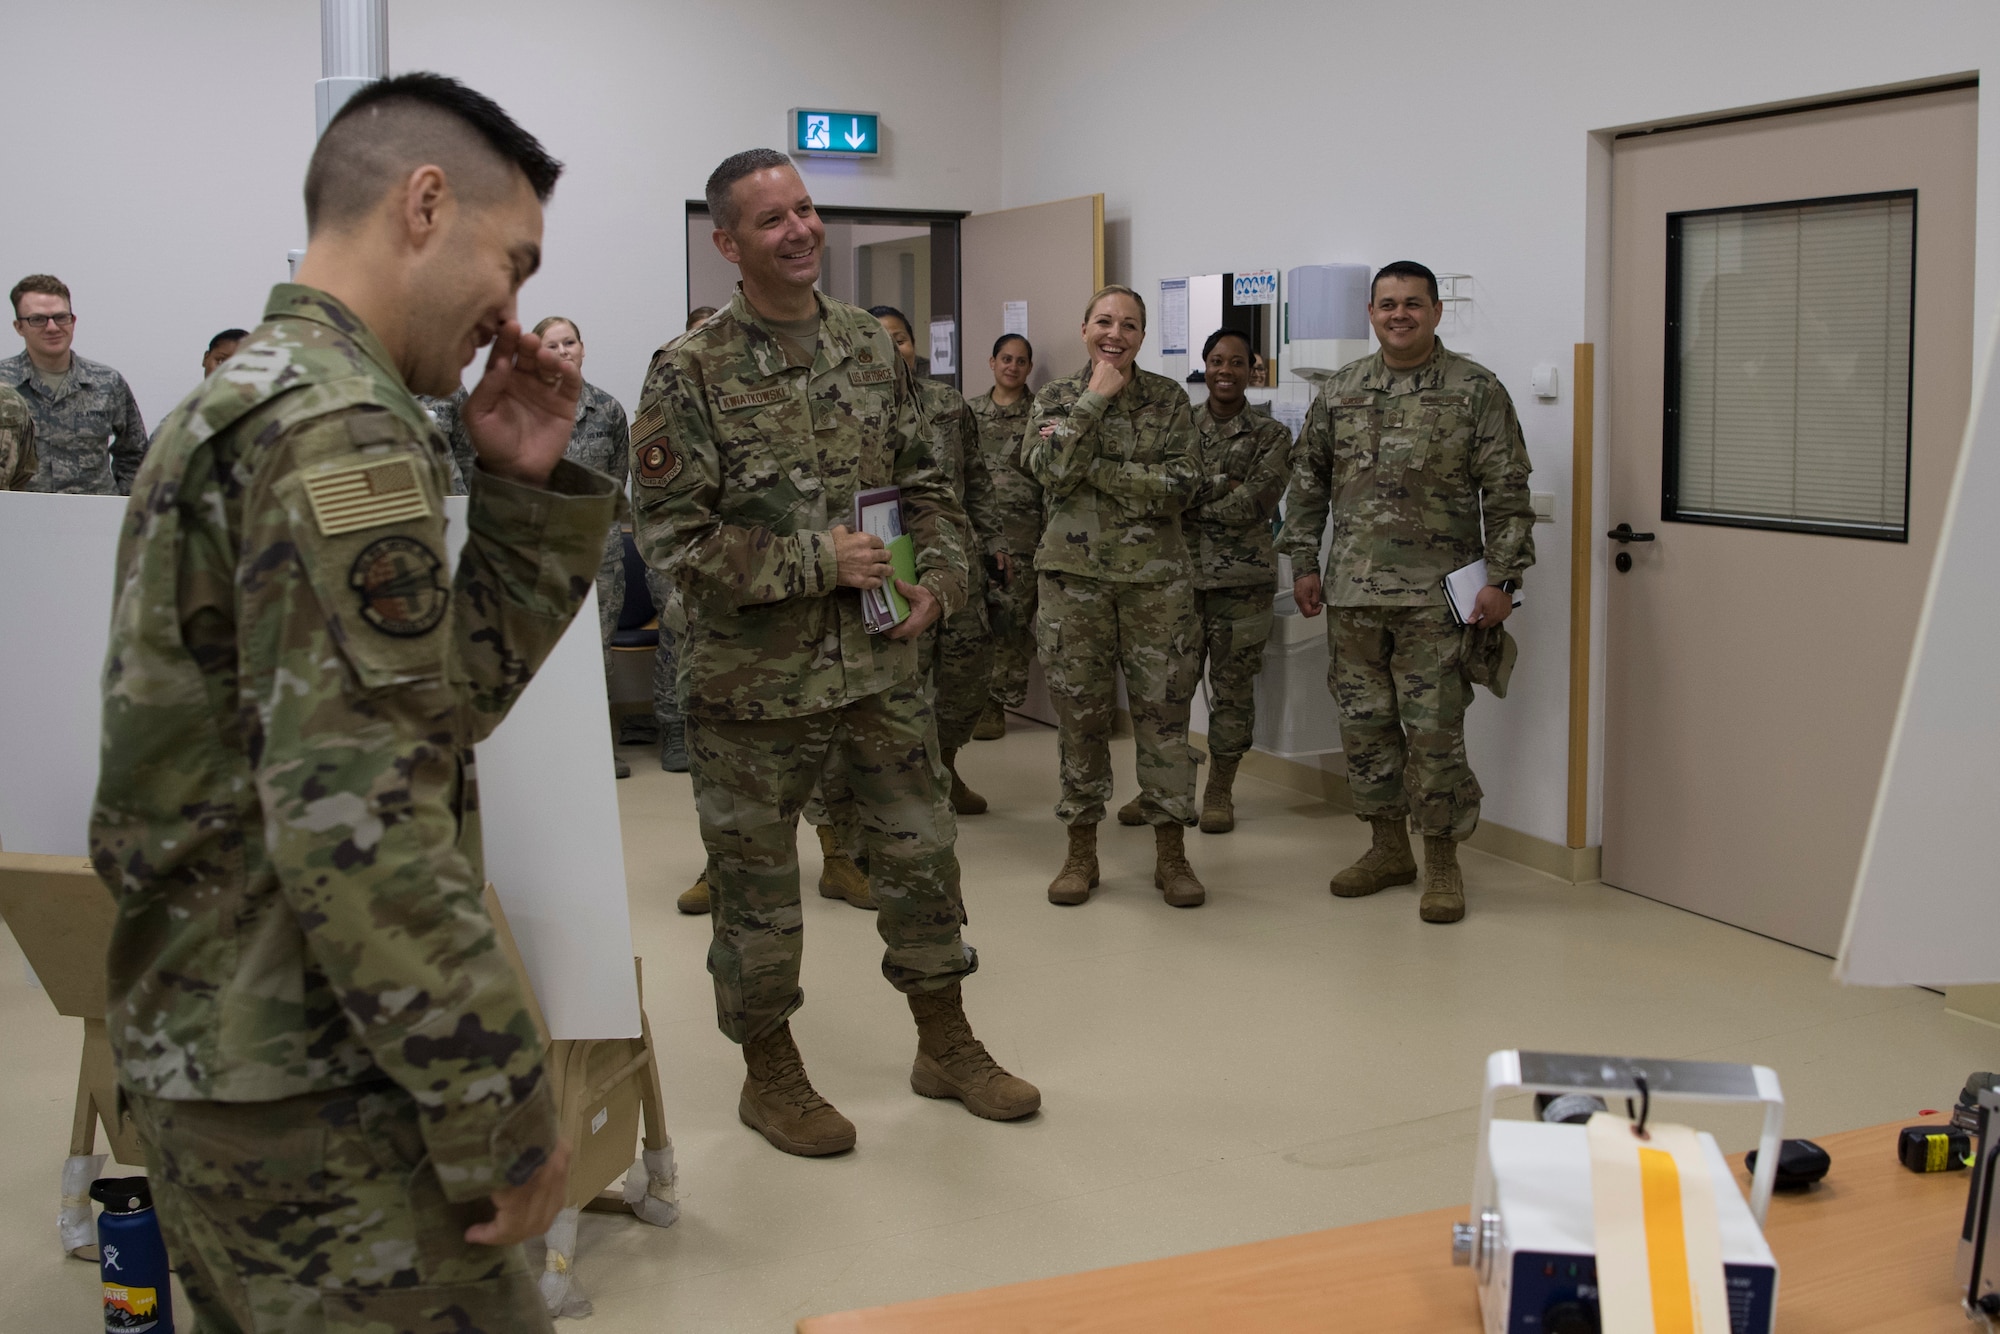 U.S. Air Force Chief Master Sgt. Randy Kwiatkowski, Third Air Force command chief, center, receives a brief from the 86th Medical Support Squadron Airmen on Ramstein Air Base, Germany, July 26, 2019. Kwiatkowski is new to the position and received a day-long tour of operations to better familiarize himself with the mission set of the Kaiserslautern Military Community. (U.S. Air Force photo by Staff Sgt. Nesha Humes Stanton)